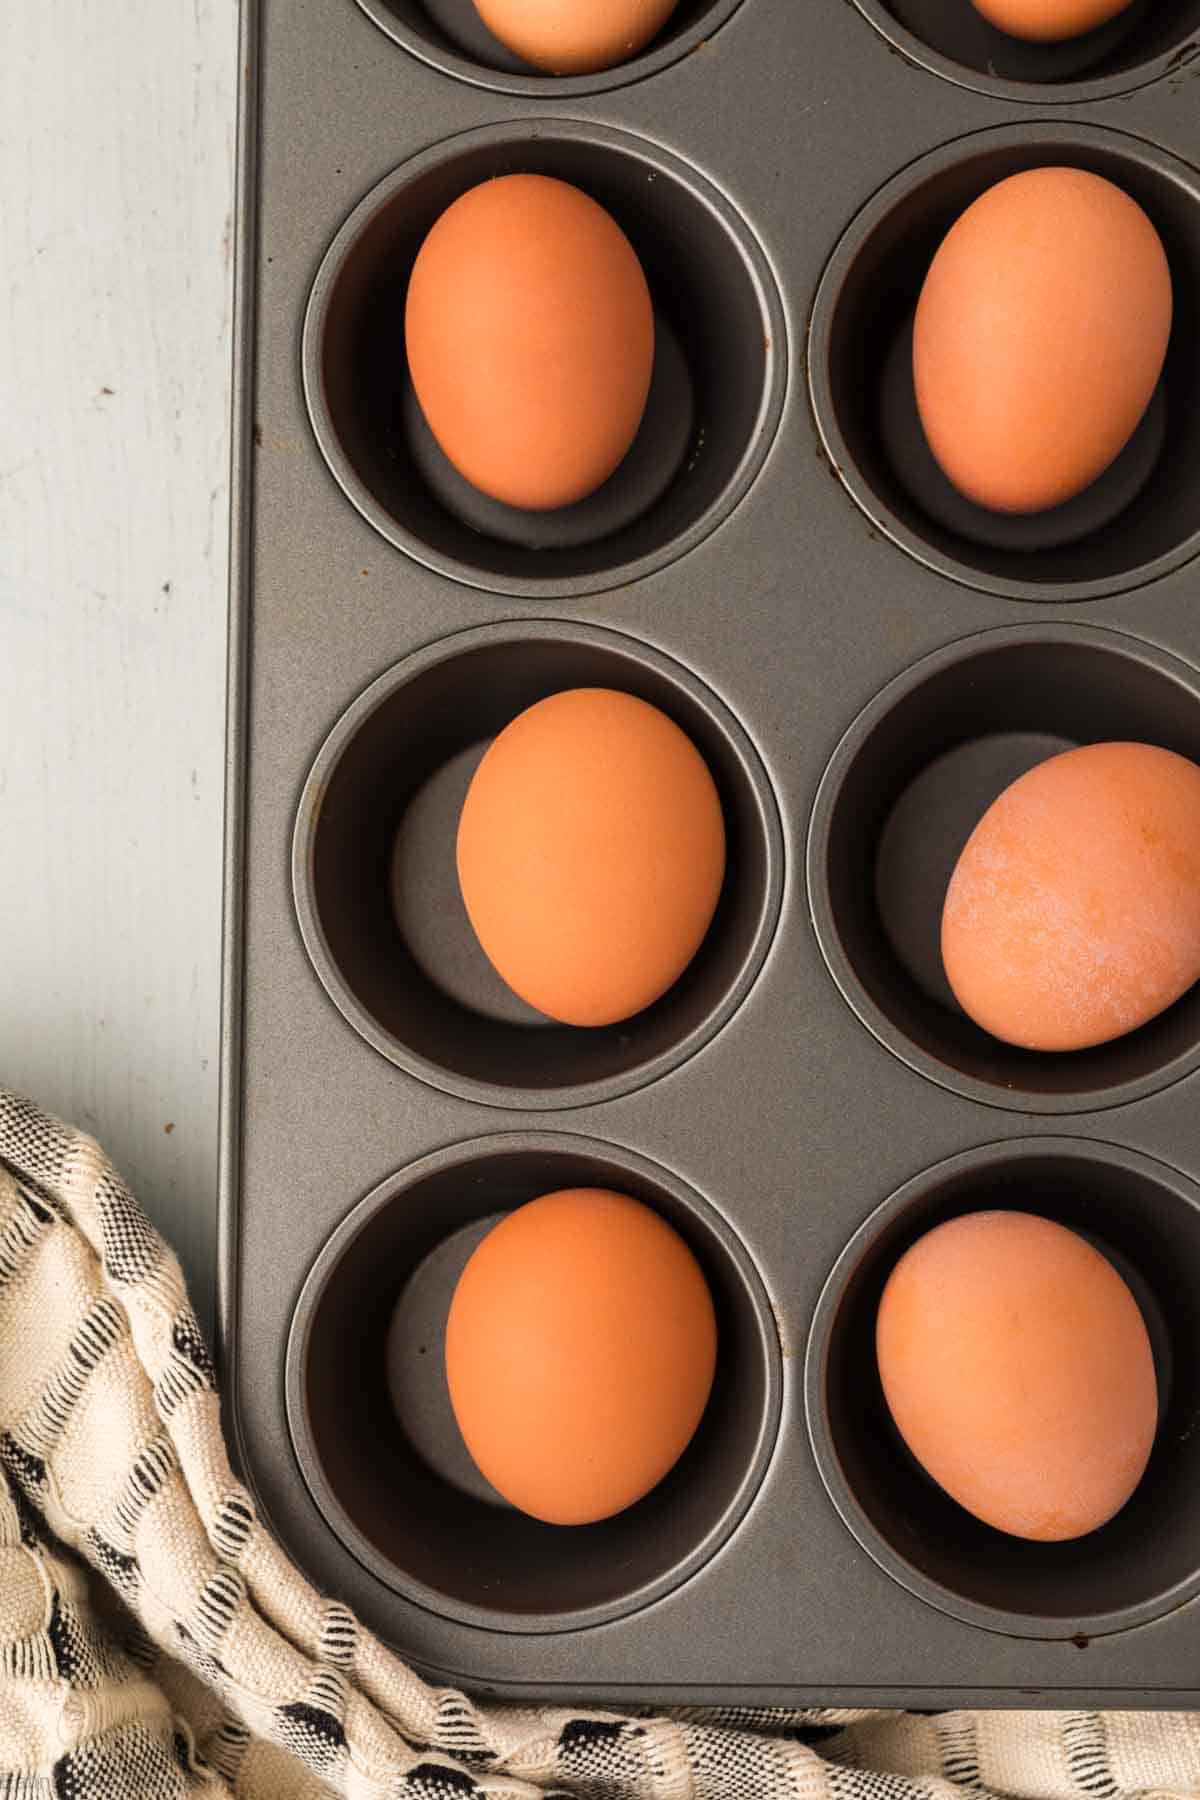 Placing eggs in a muffin tin